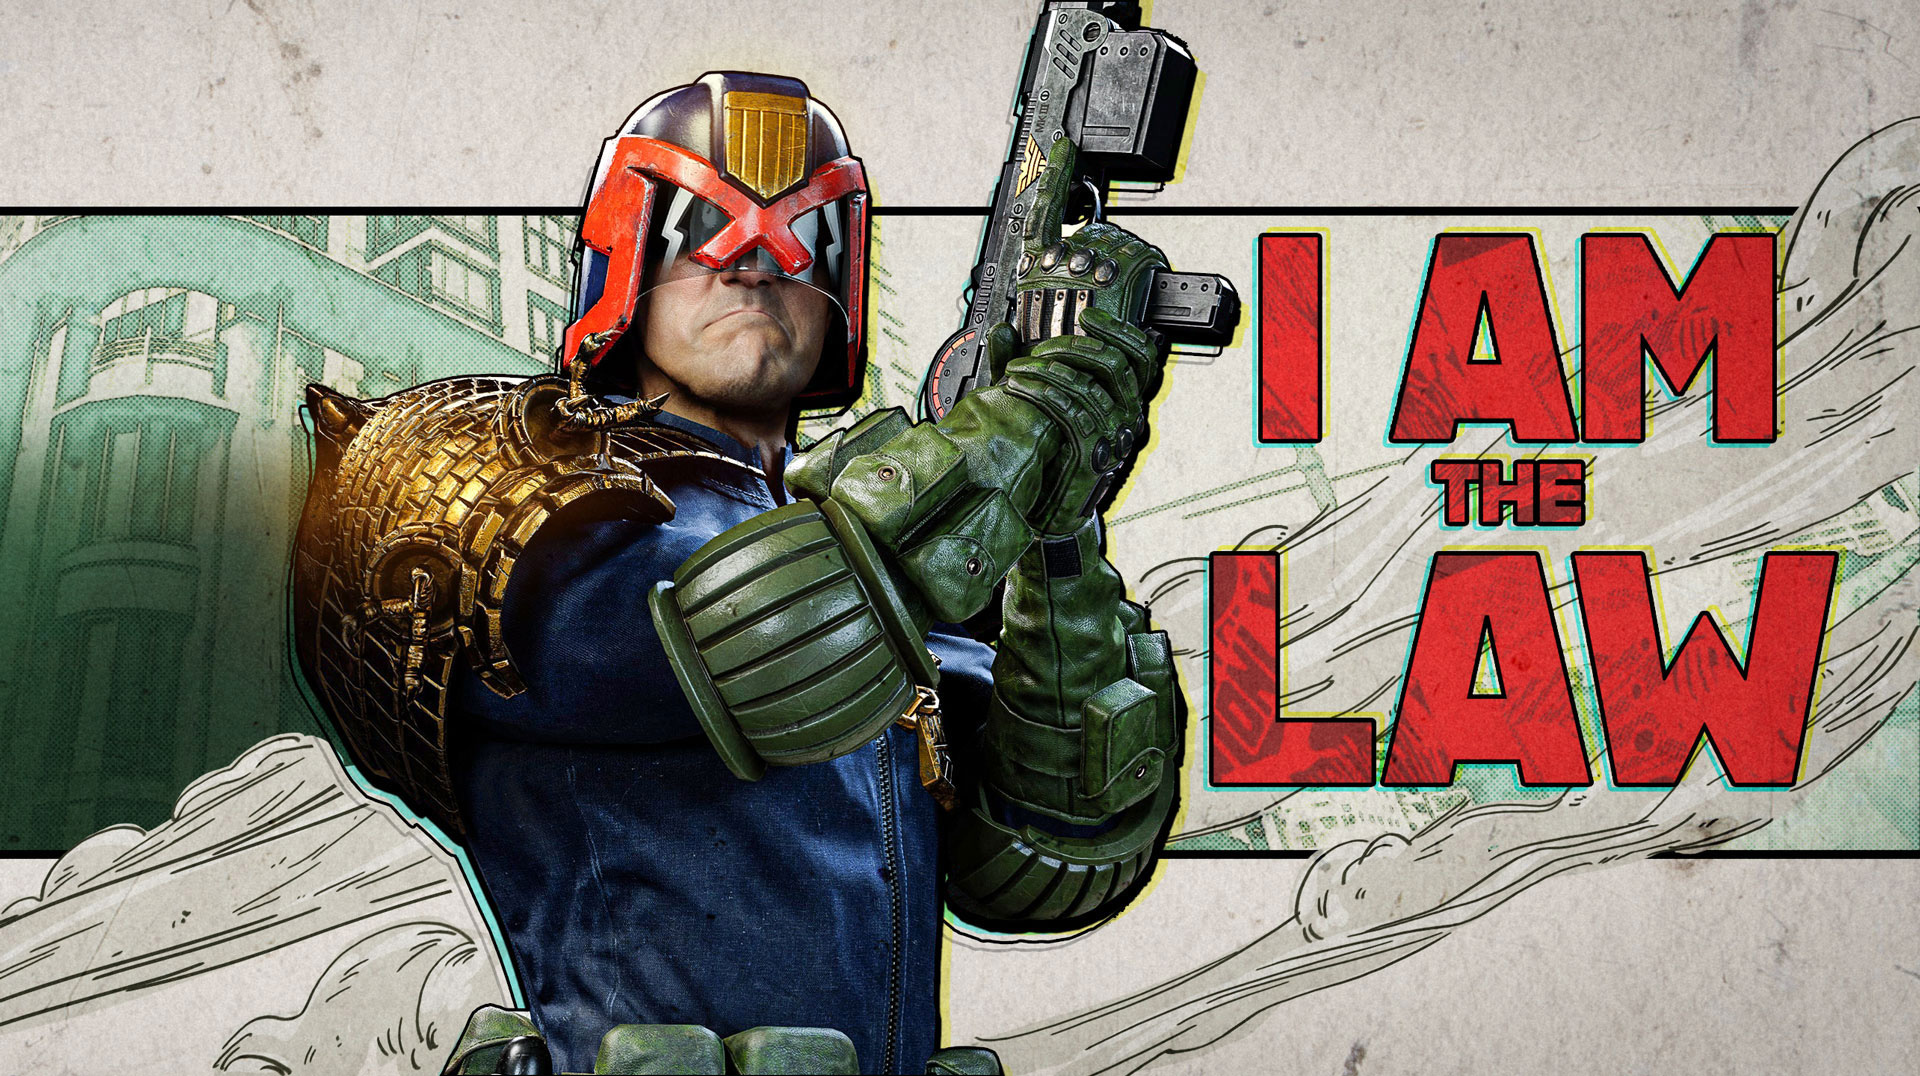 I am the law dredd actuator clamp using solid edge software